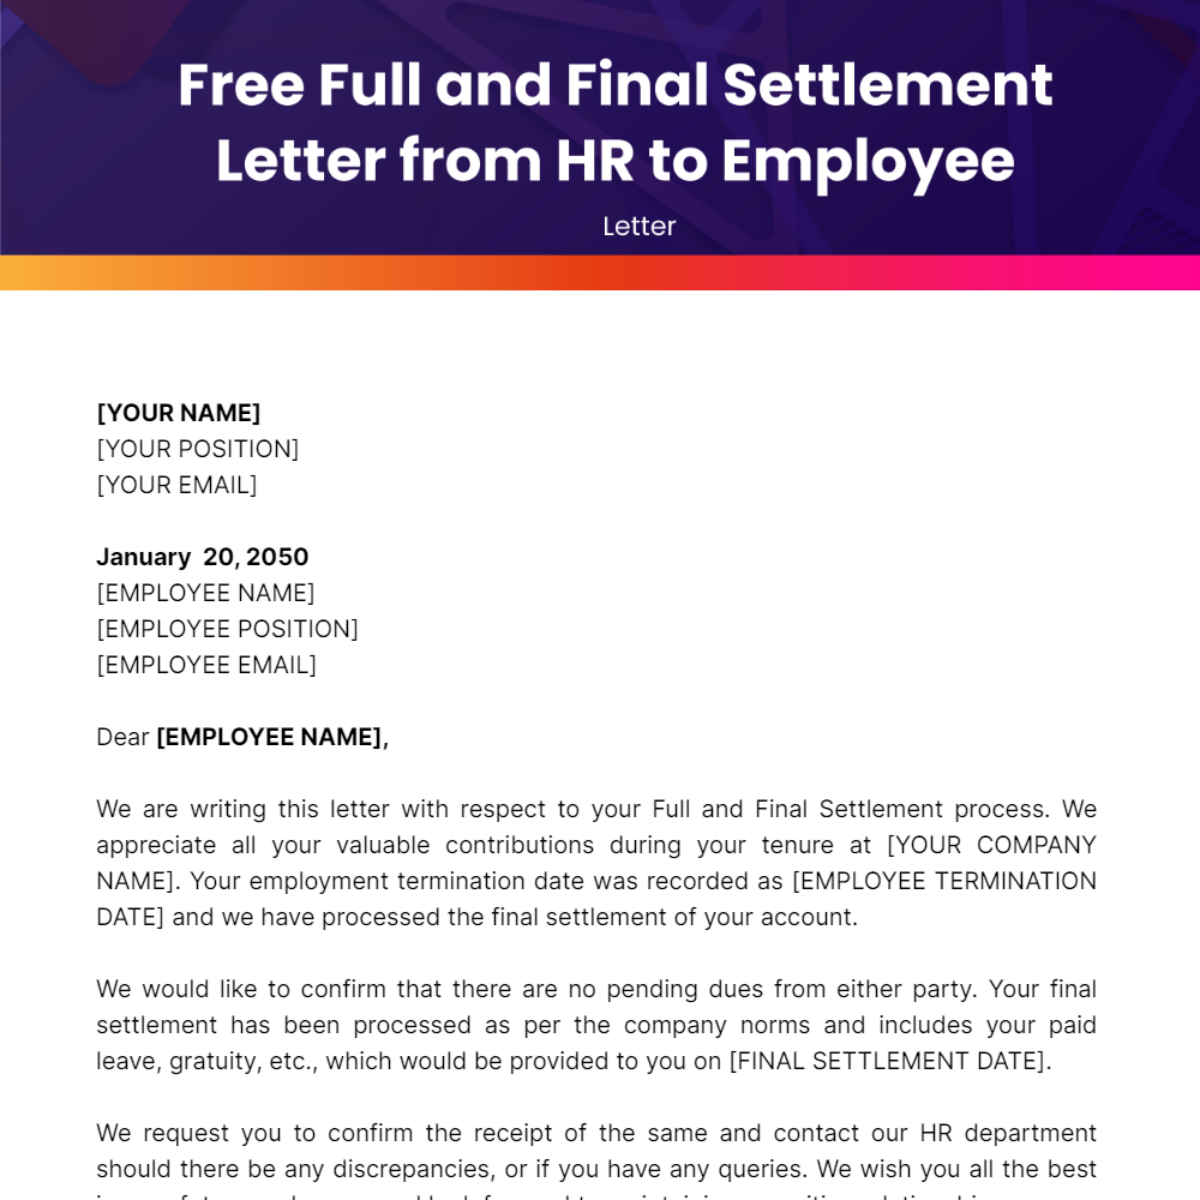 Full and Final Settlement Letter from HR to Employee Template